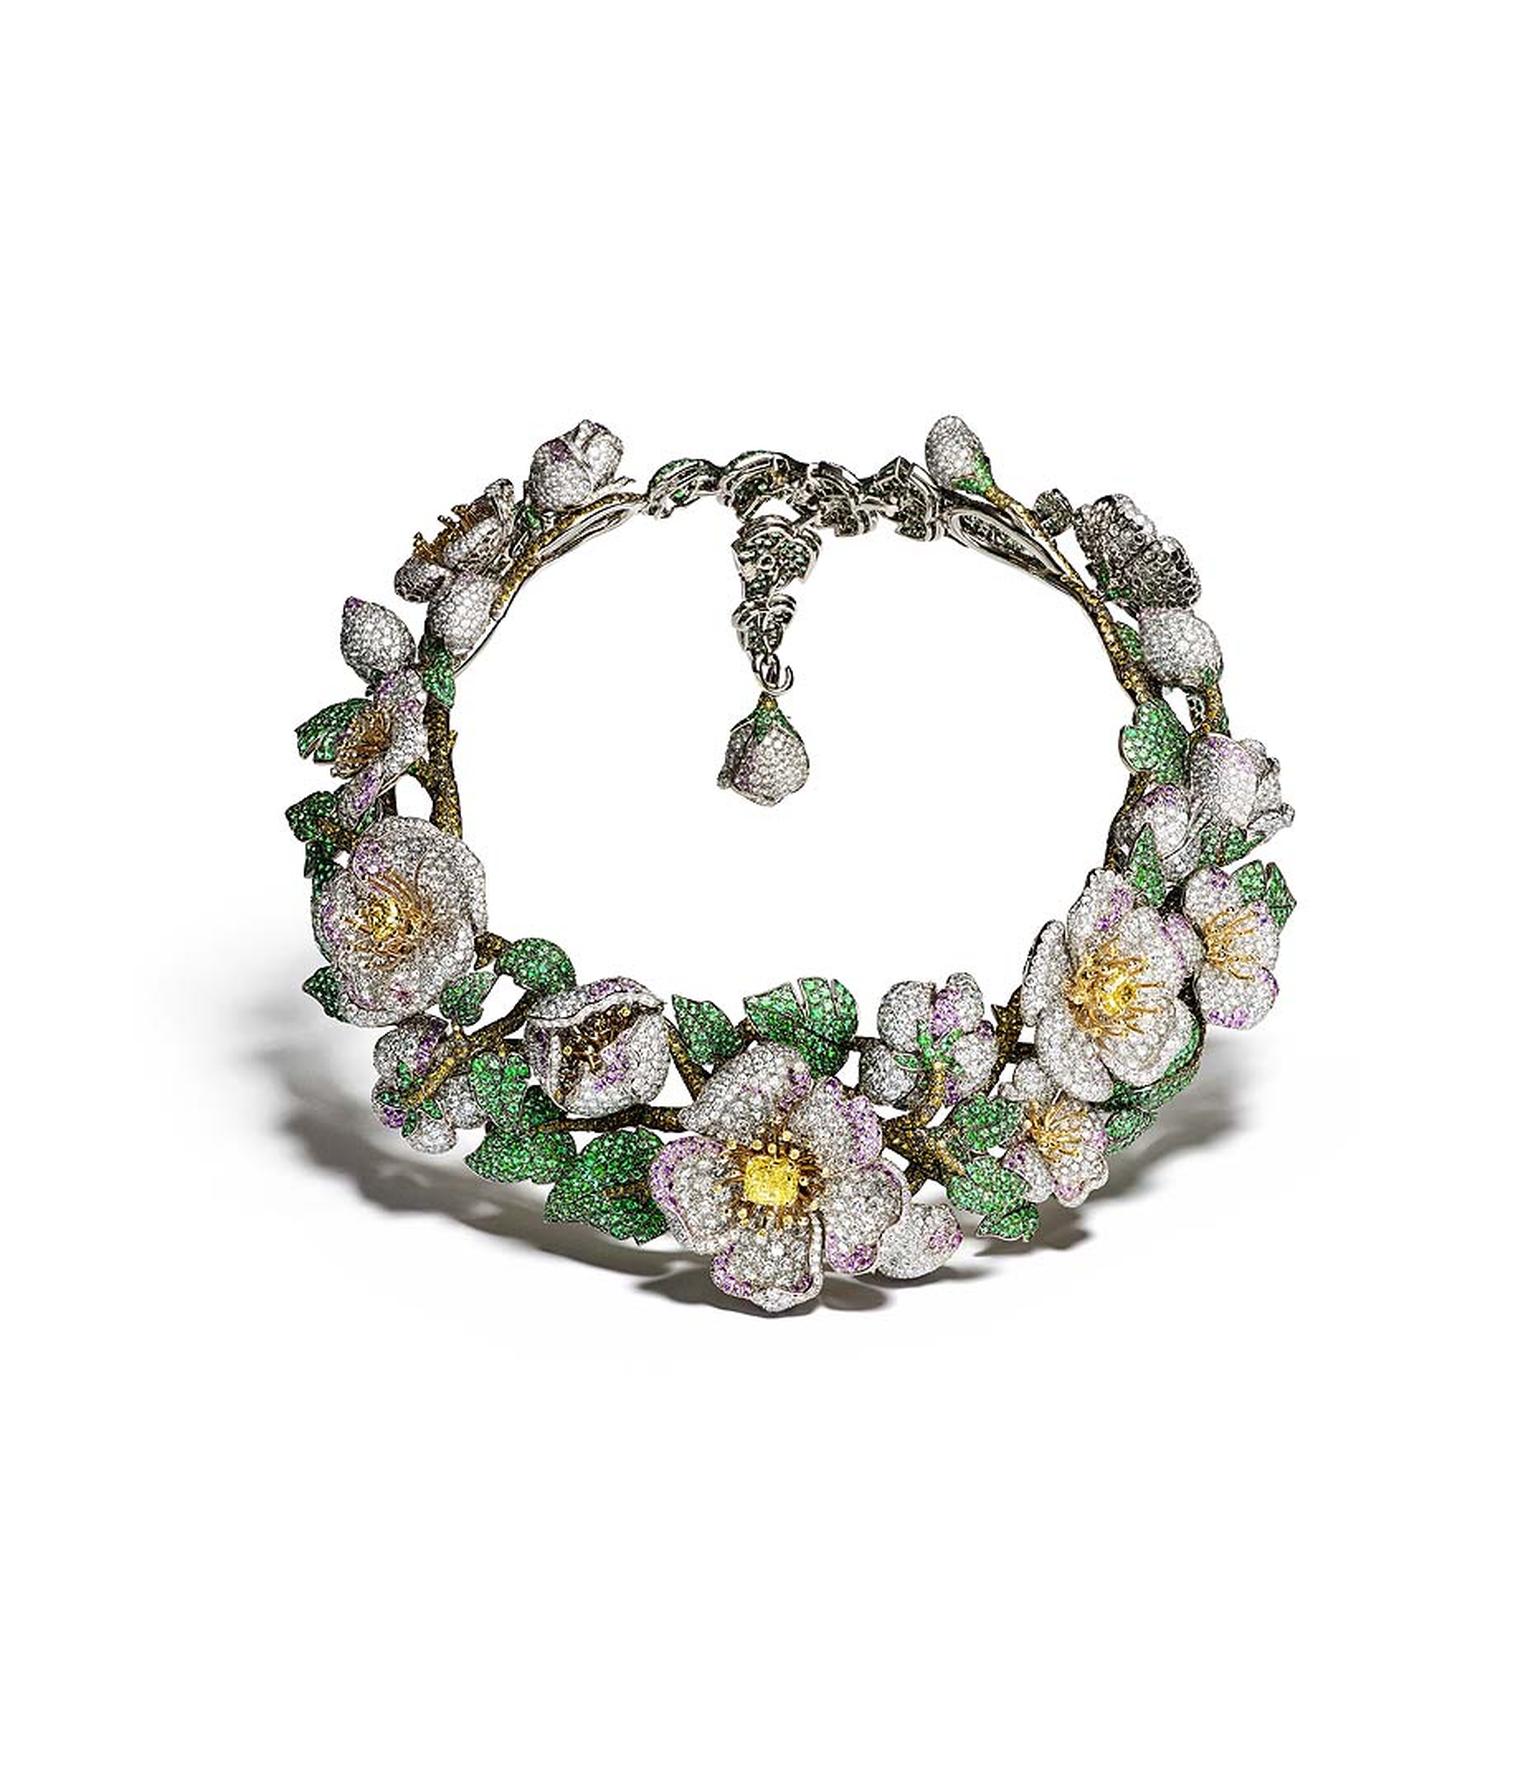 Giampiero Bodino Simonetta necklace from the Primavera collection set with yellow, white and cognac diamonds, pink sapphires and emeralds in white and yellow gold.